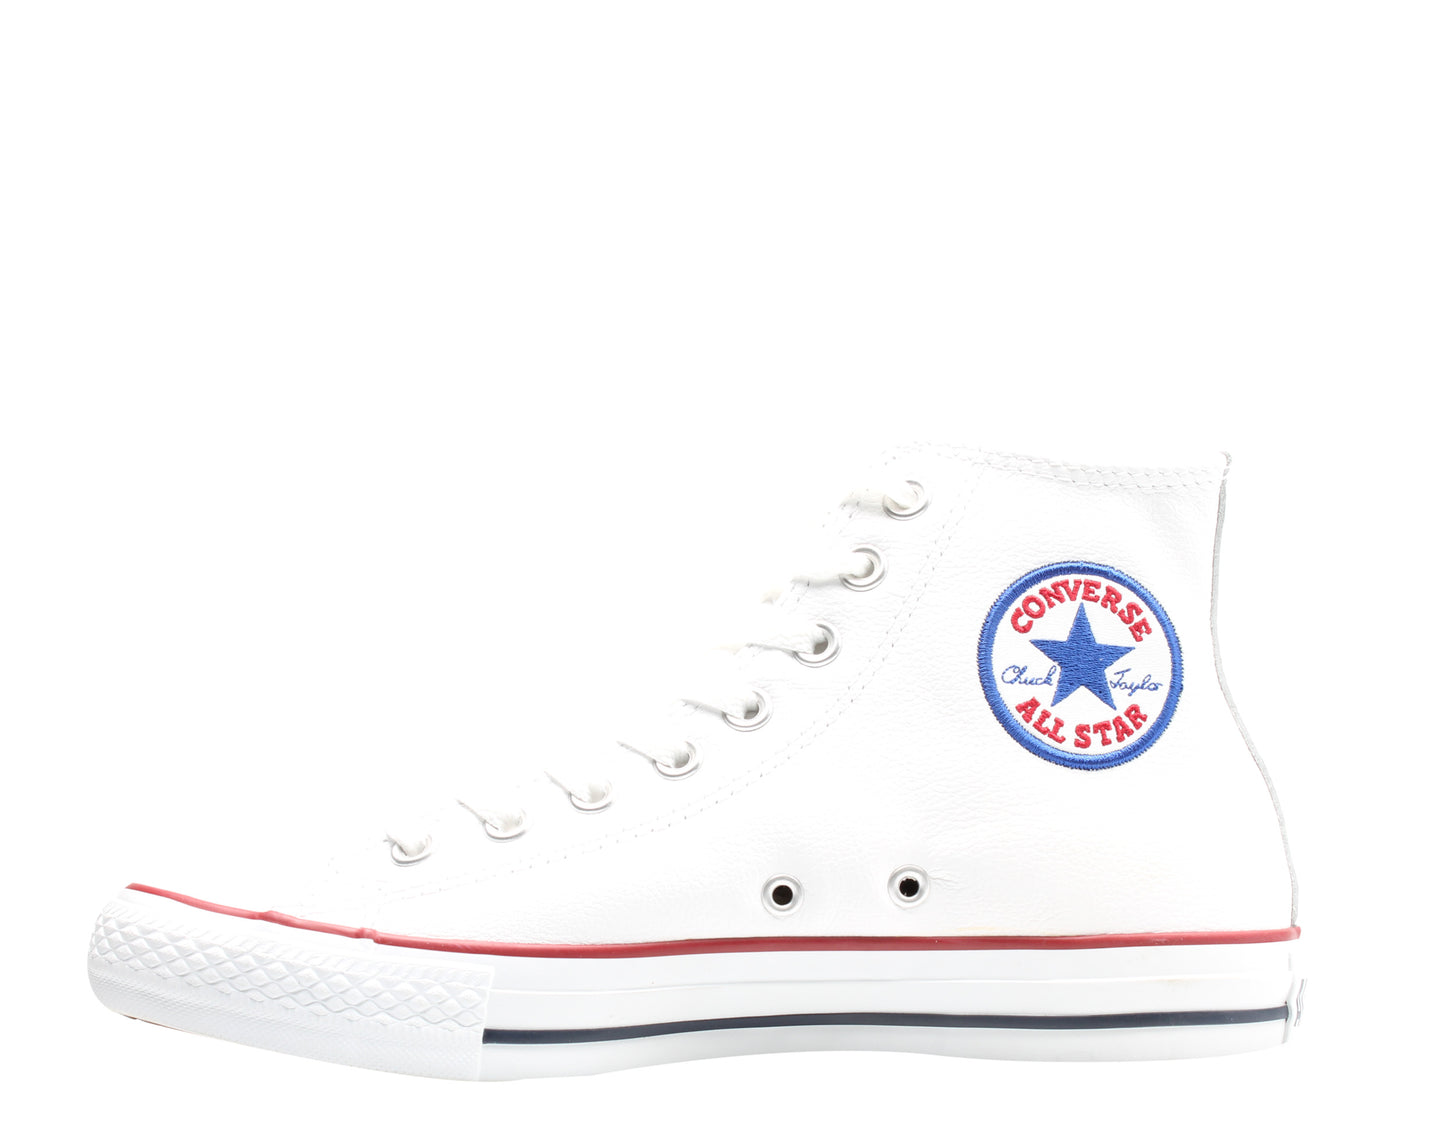 Converse Chuck Taylor All Star Leather Optical White High Top Sneakers 1U010